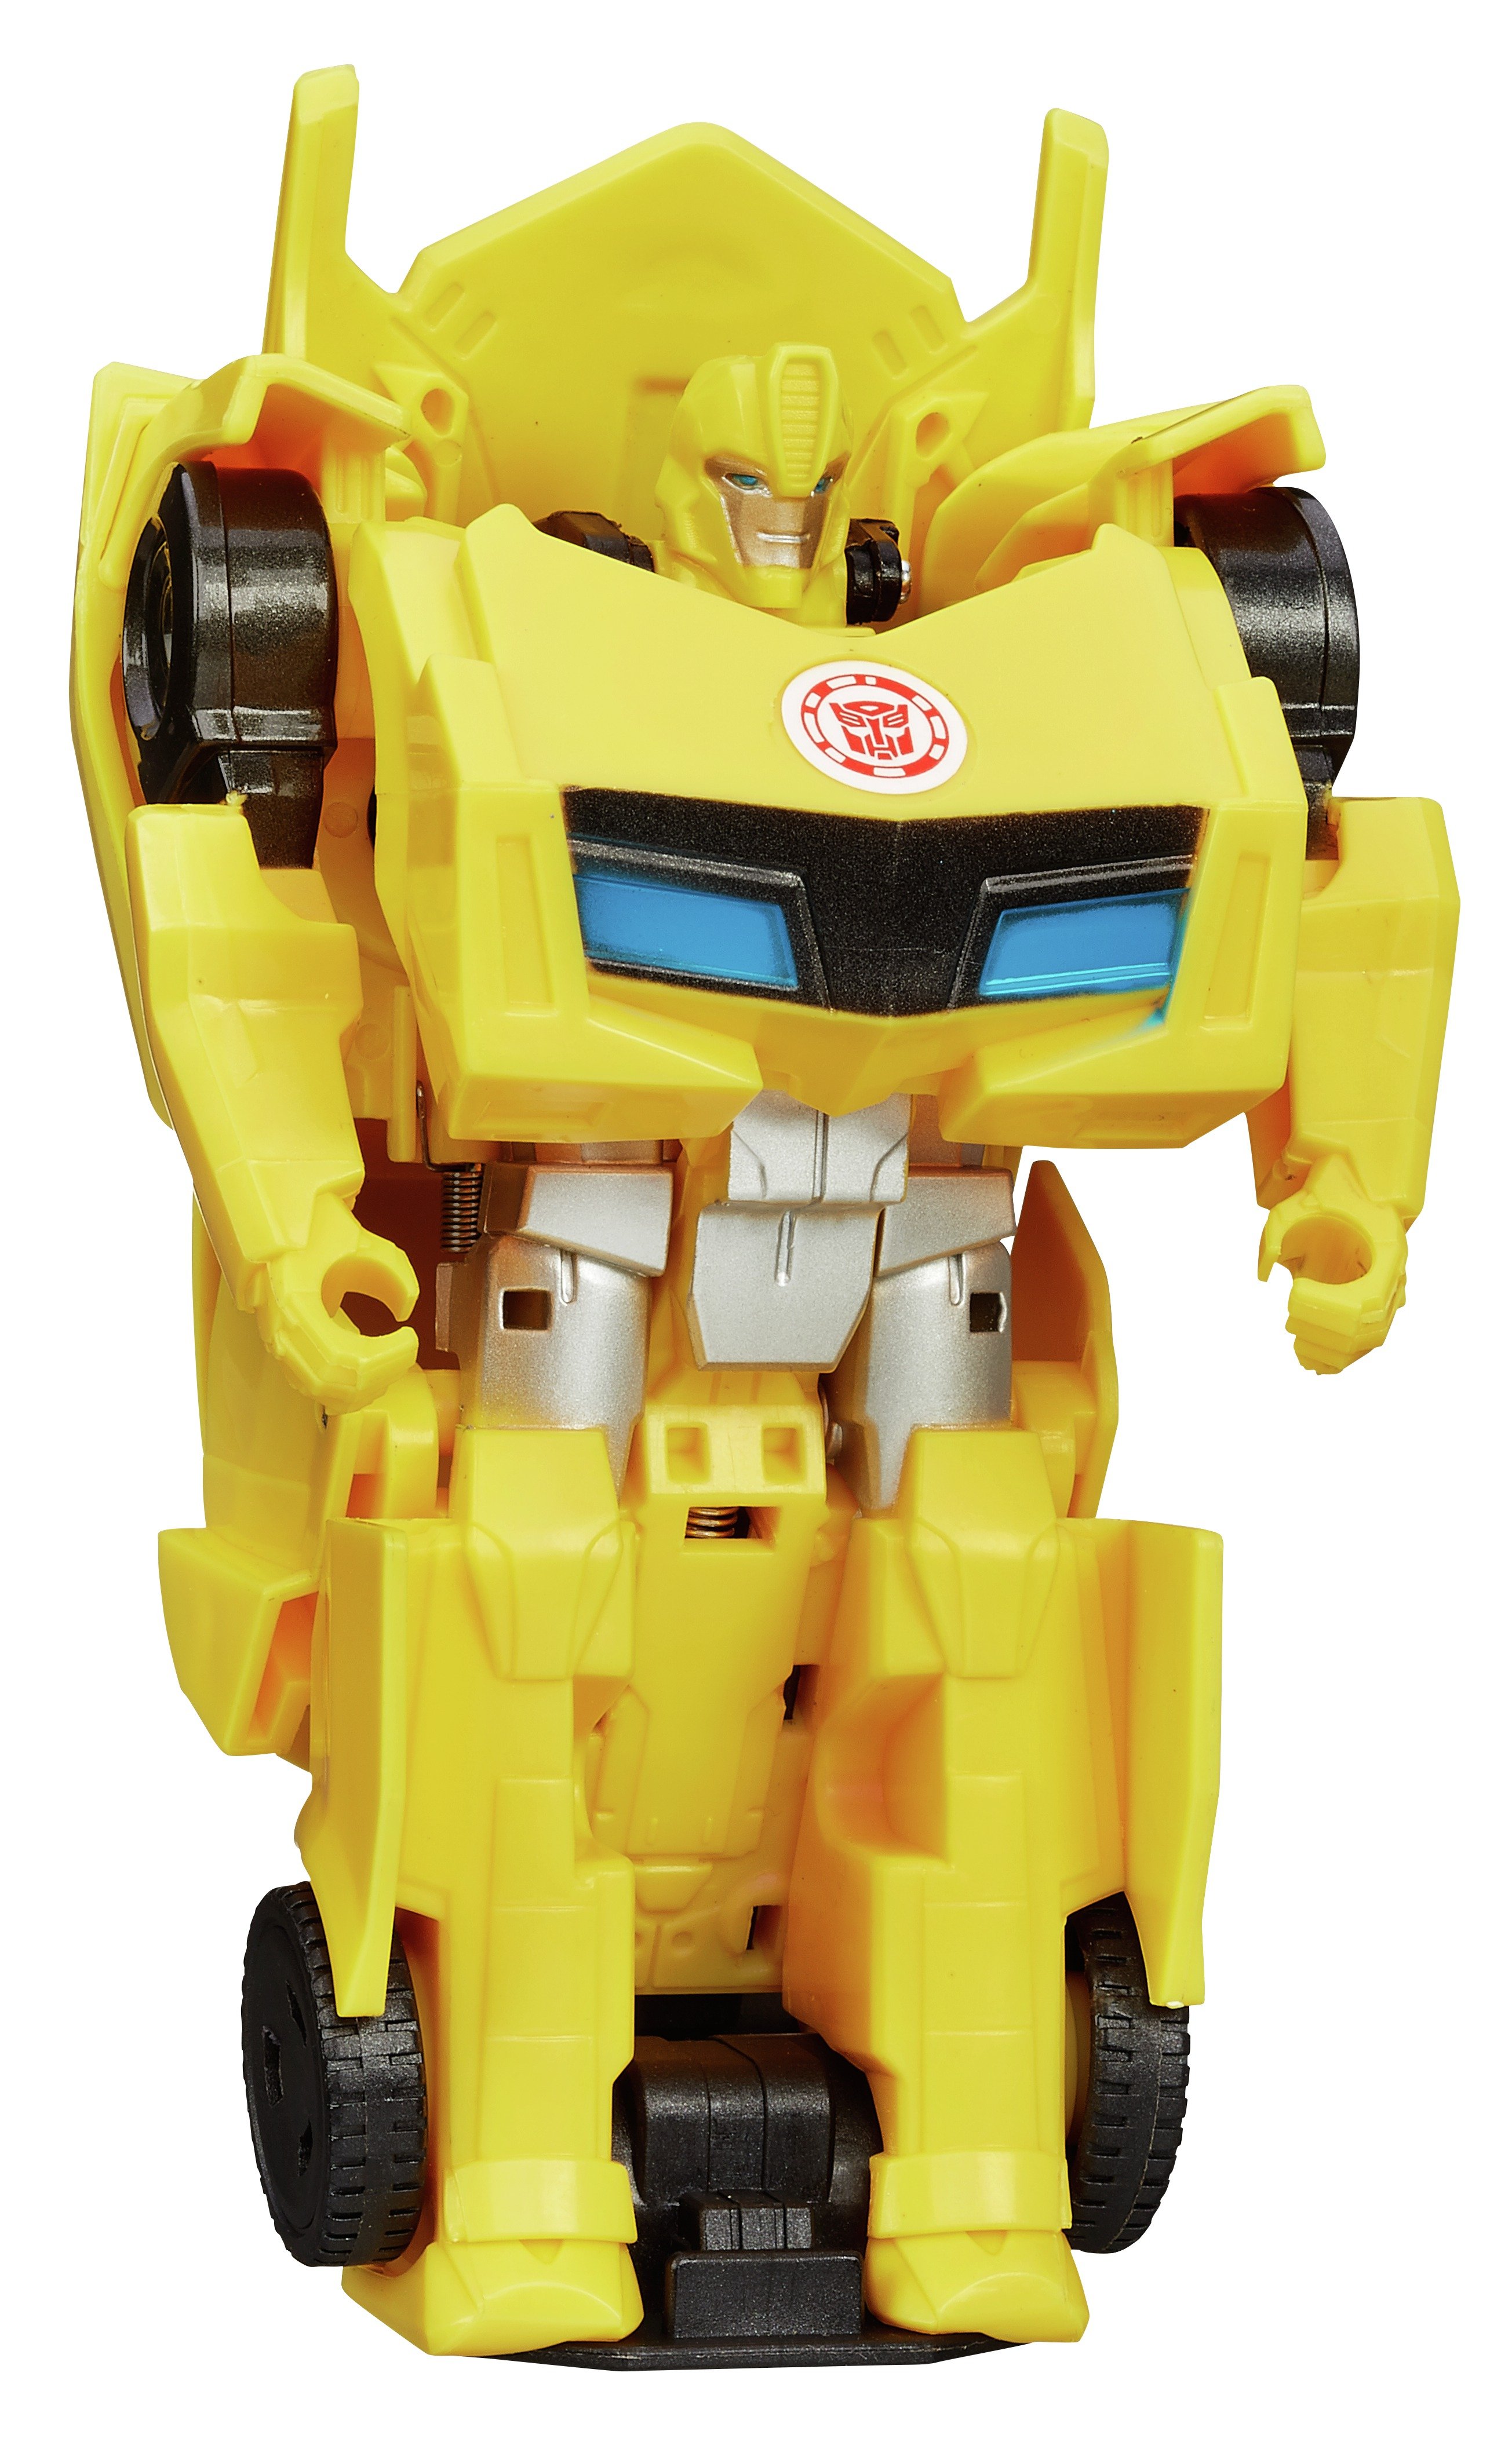 Transformers Robots in Disguise One Step Changers